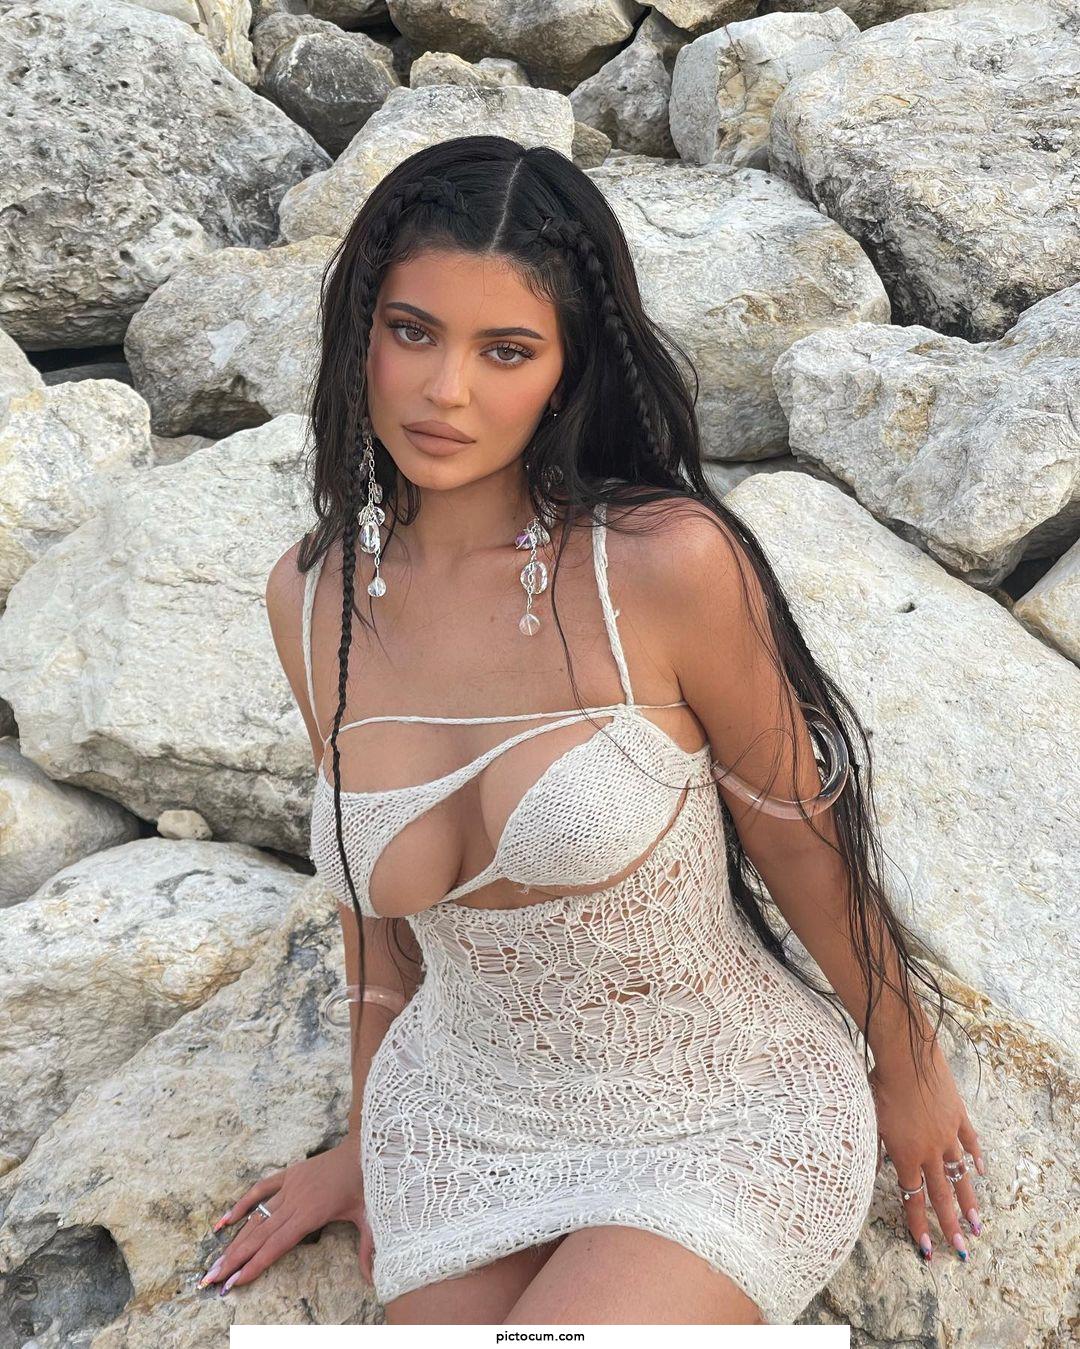 Trying so fucking hard not to stroke my cock to Kylie Jenner's perfect body.